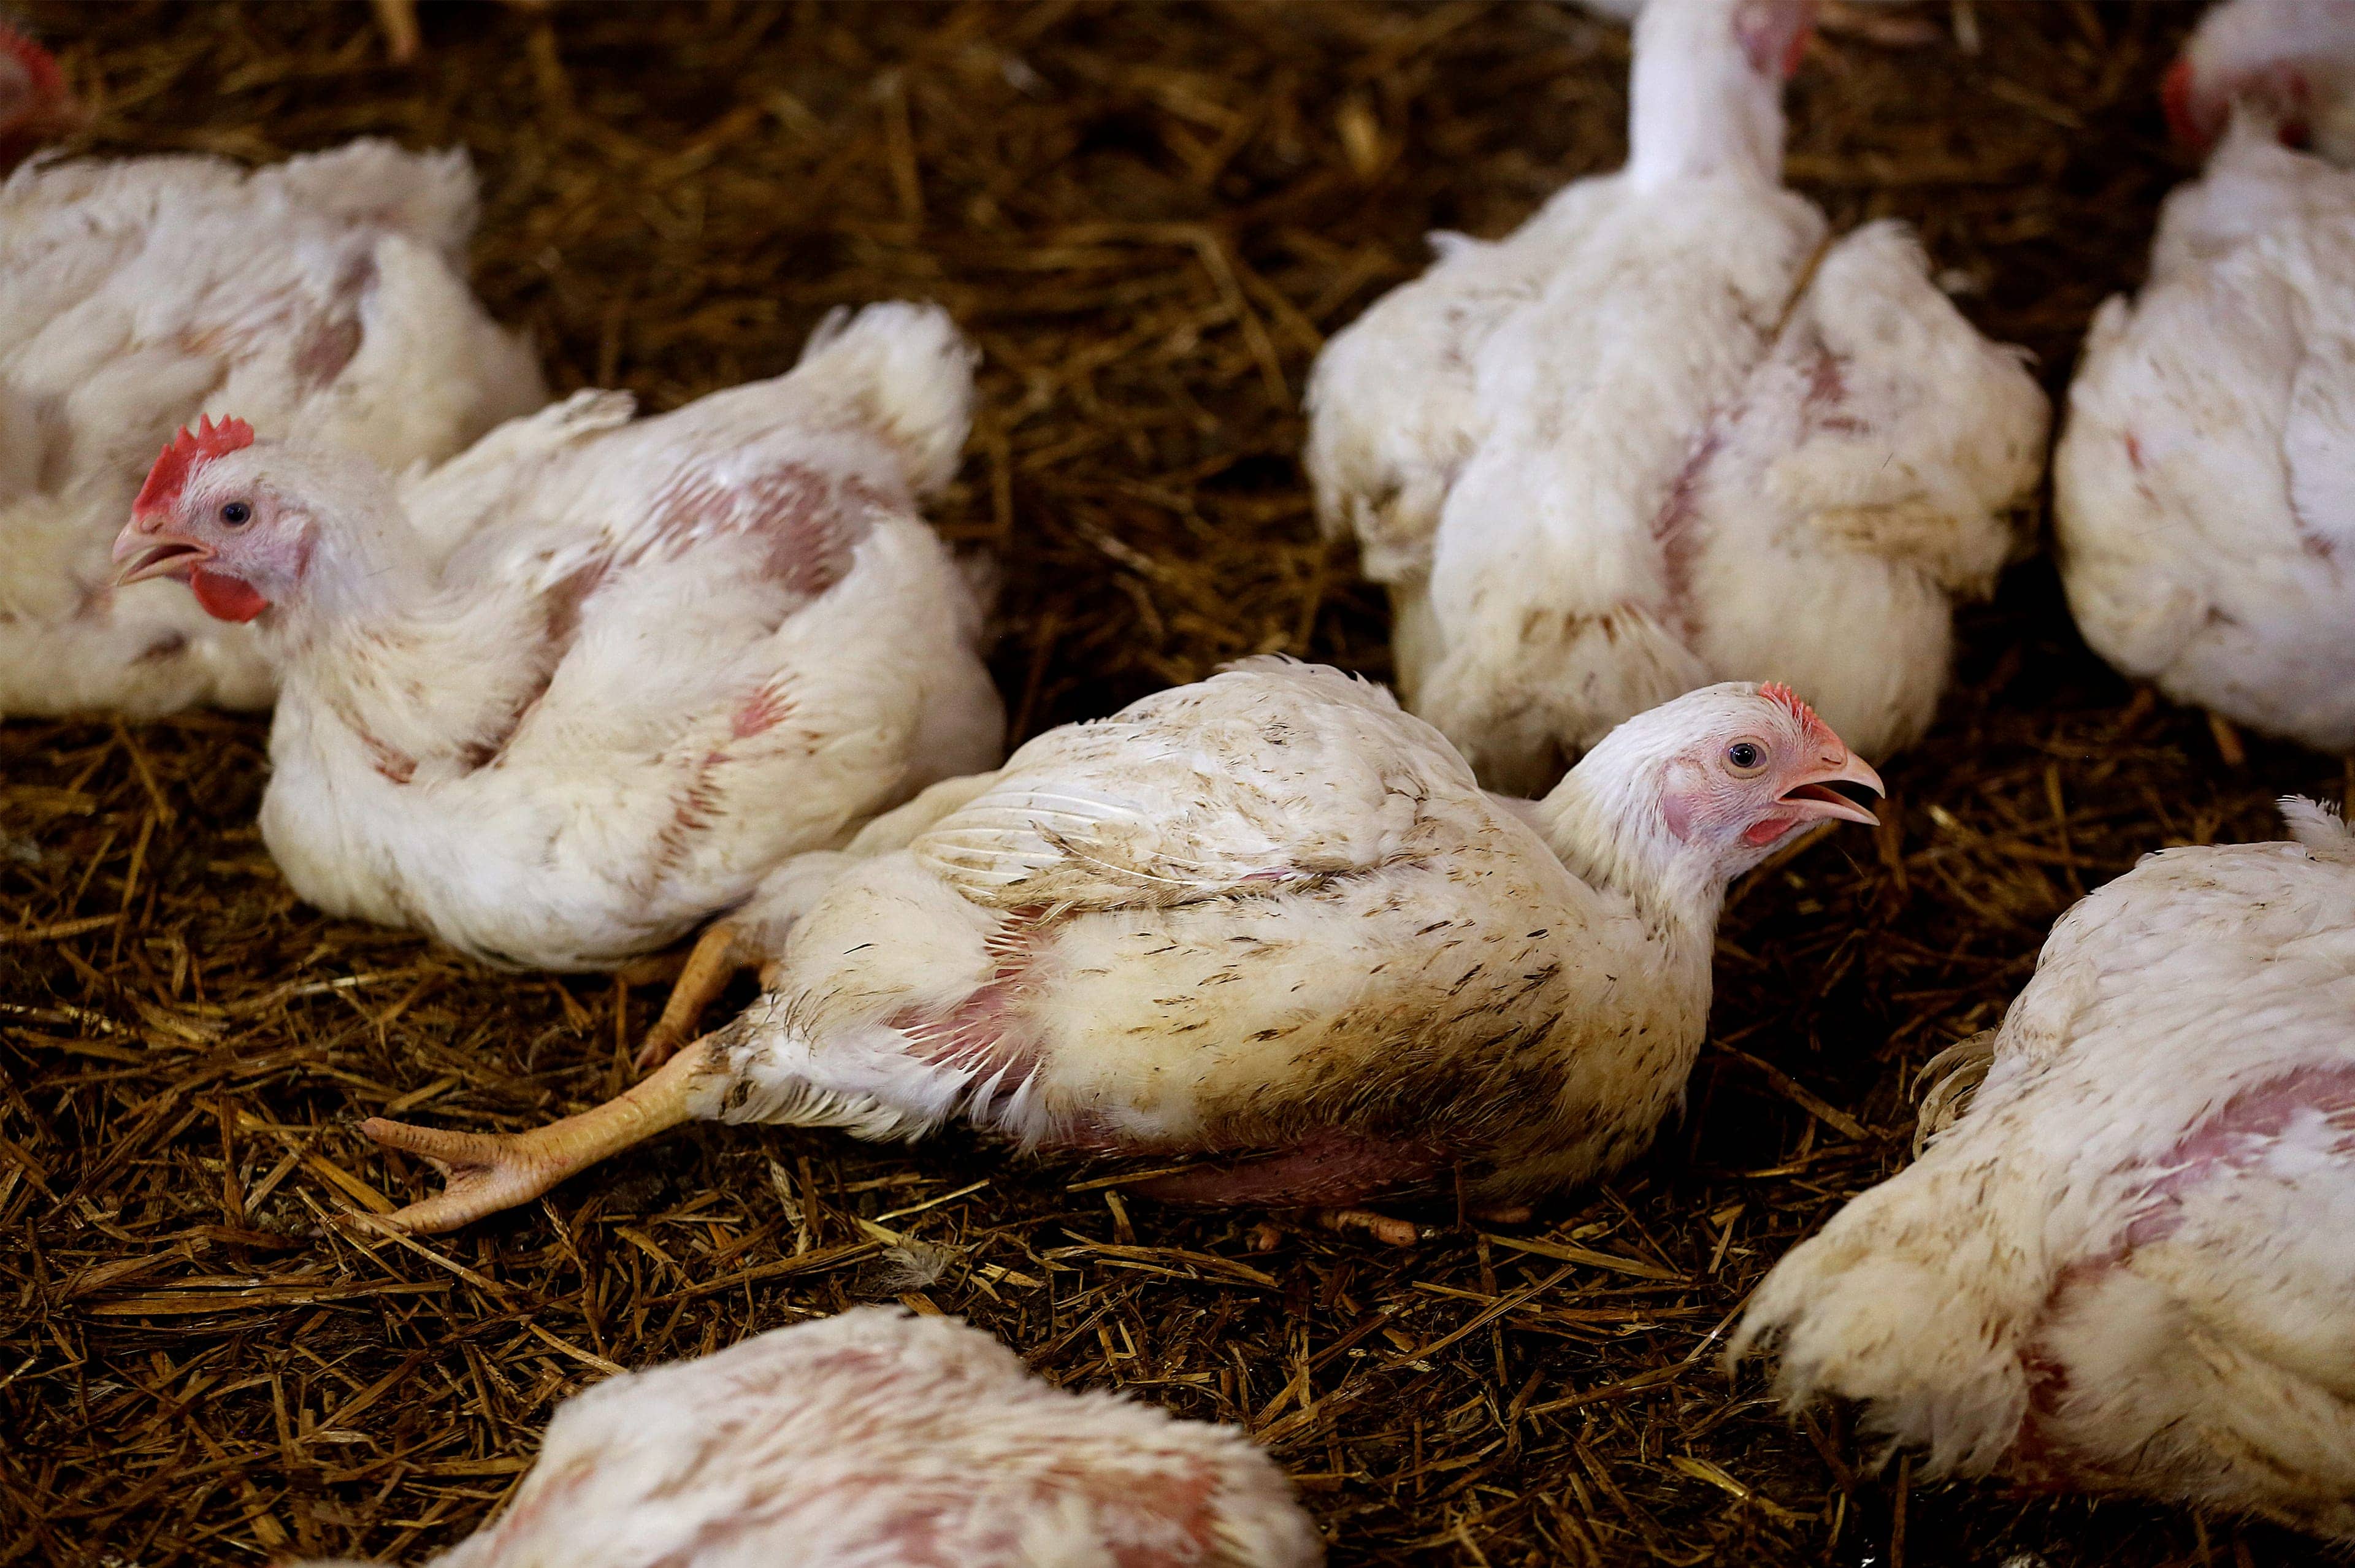 Shocking investigation into one of the UK's biggest chicken producers